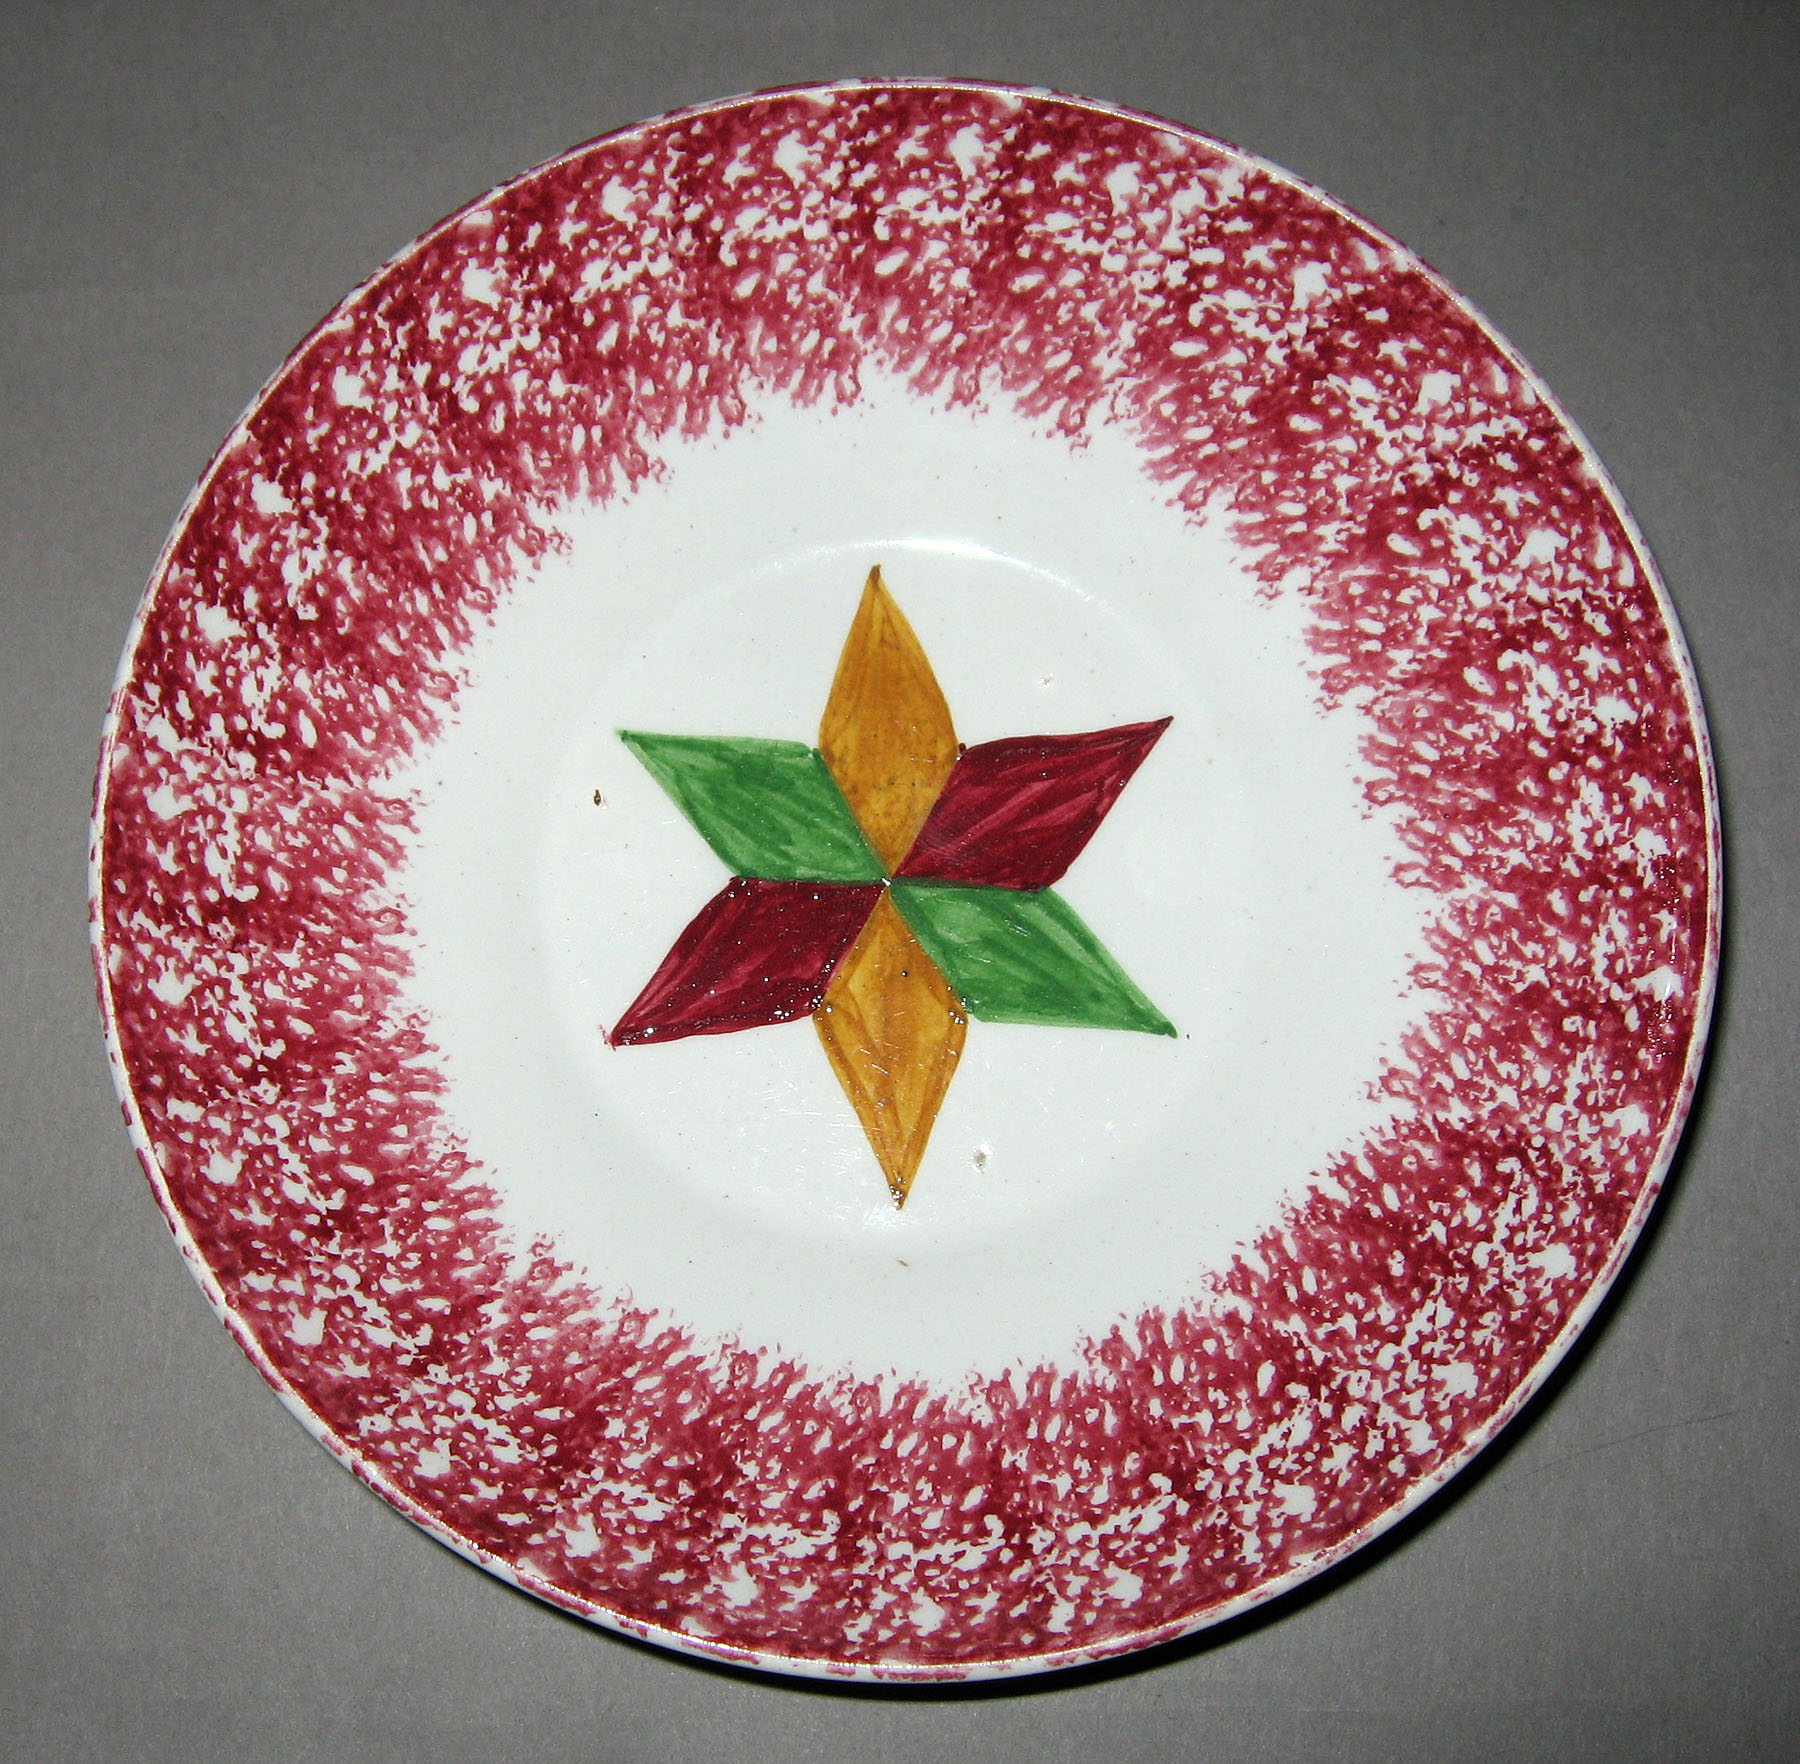 1965.0904 Pink spatterware and tri-color star pattern saucer